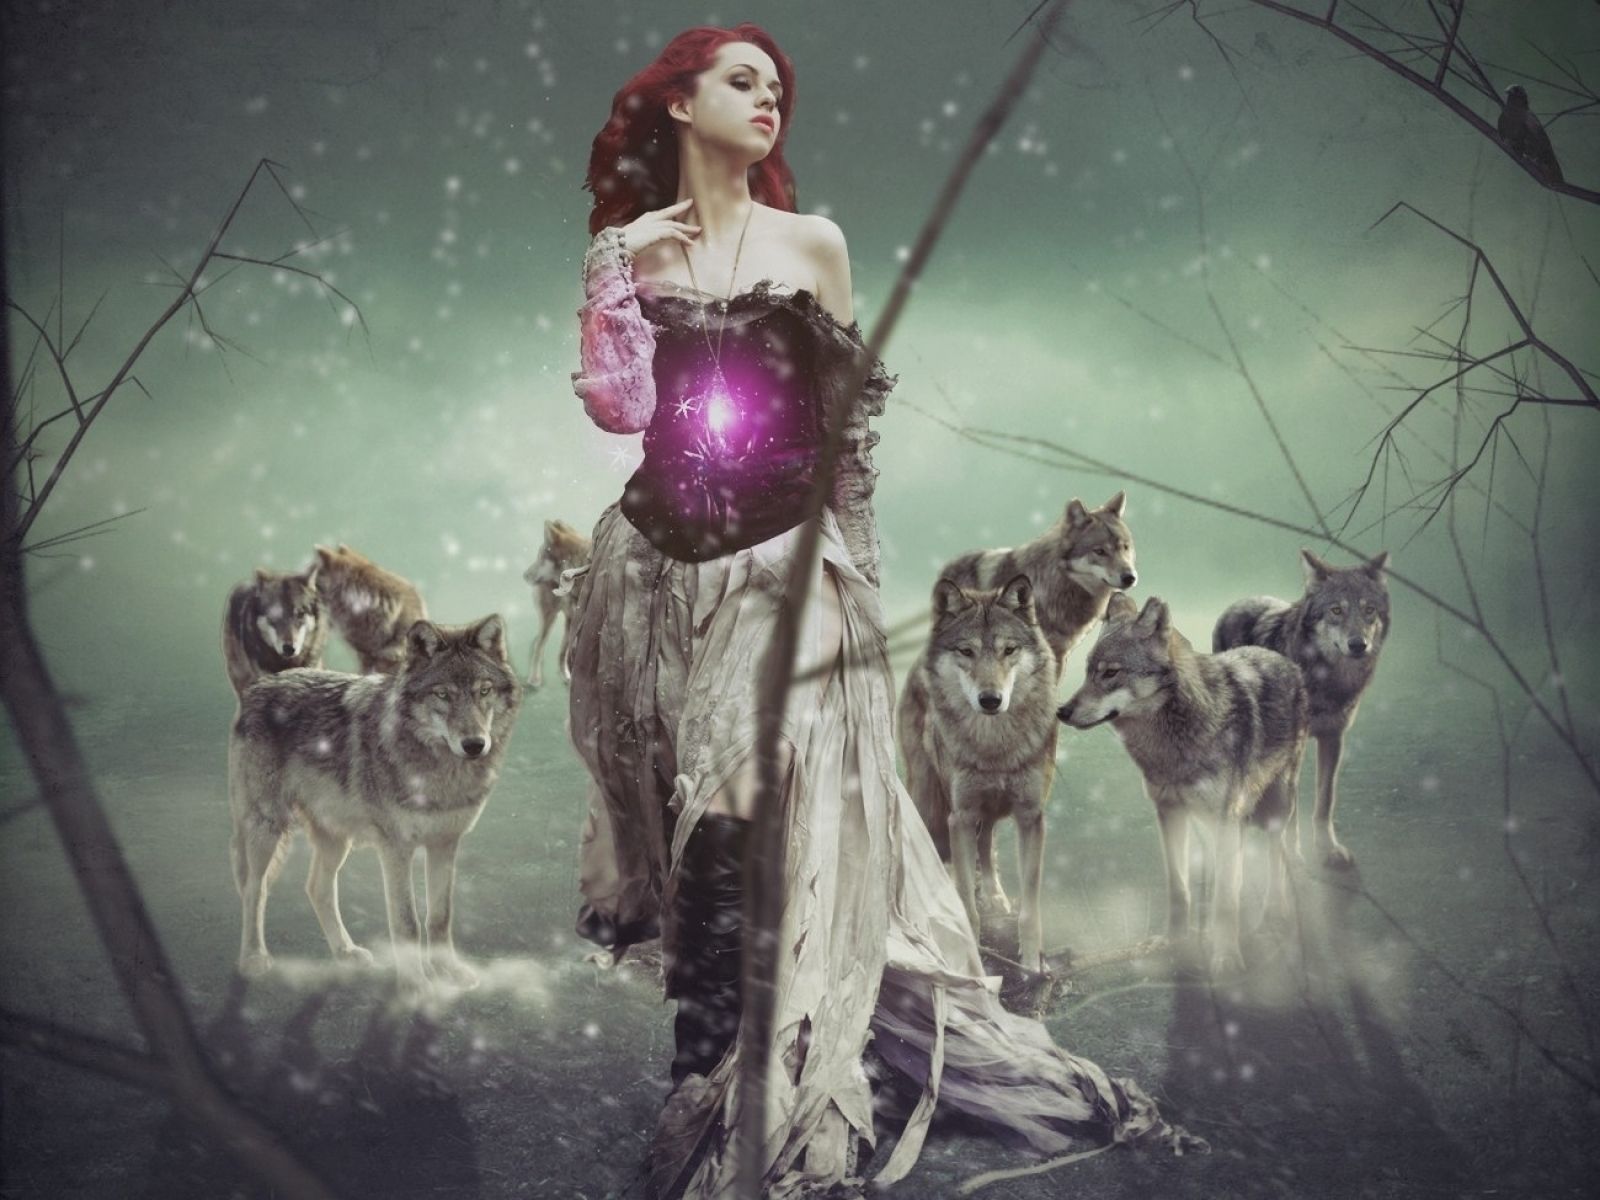 Download Wallpaper, Download 1600x1200 women trees redheads fantasy art glowing crows amulet wolves 1300x975 wal. Wolves and women, Fantasy art, Animal wallpaper